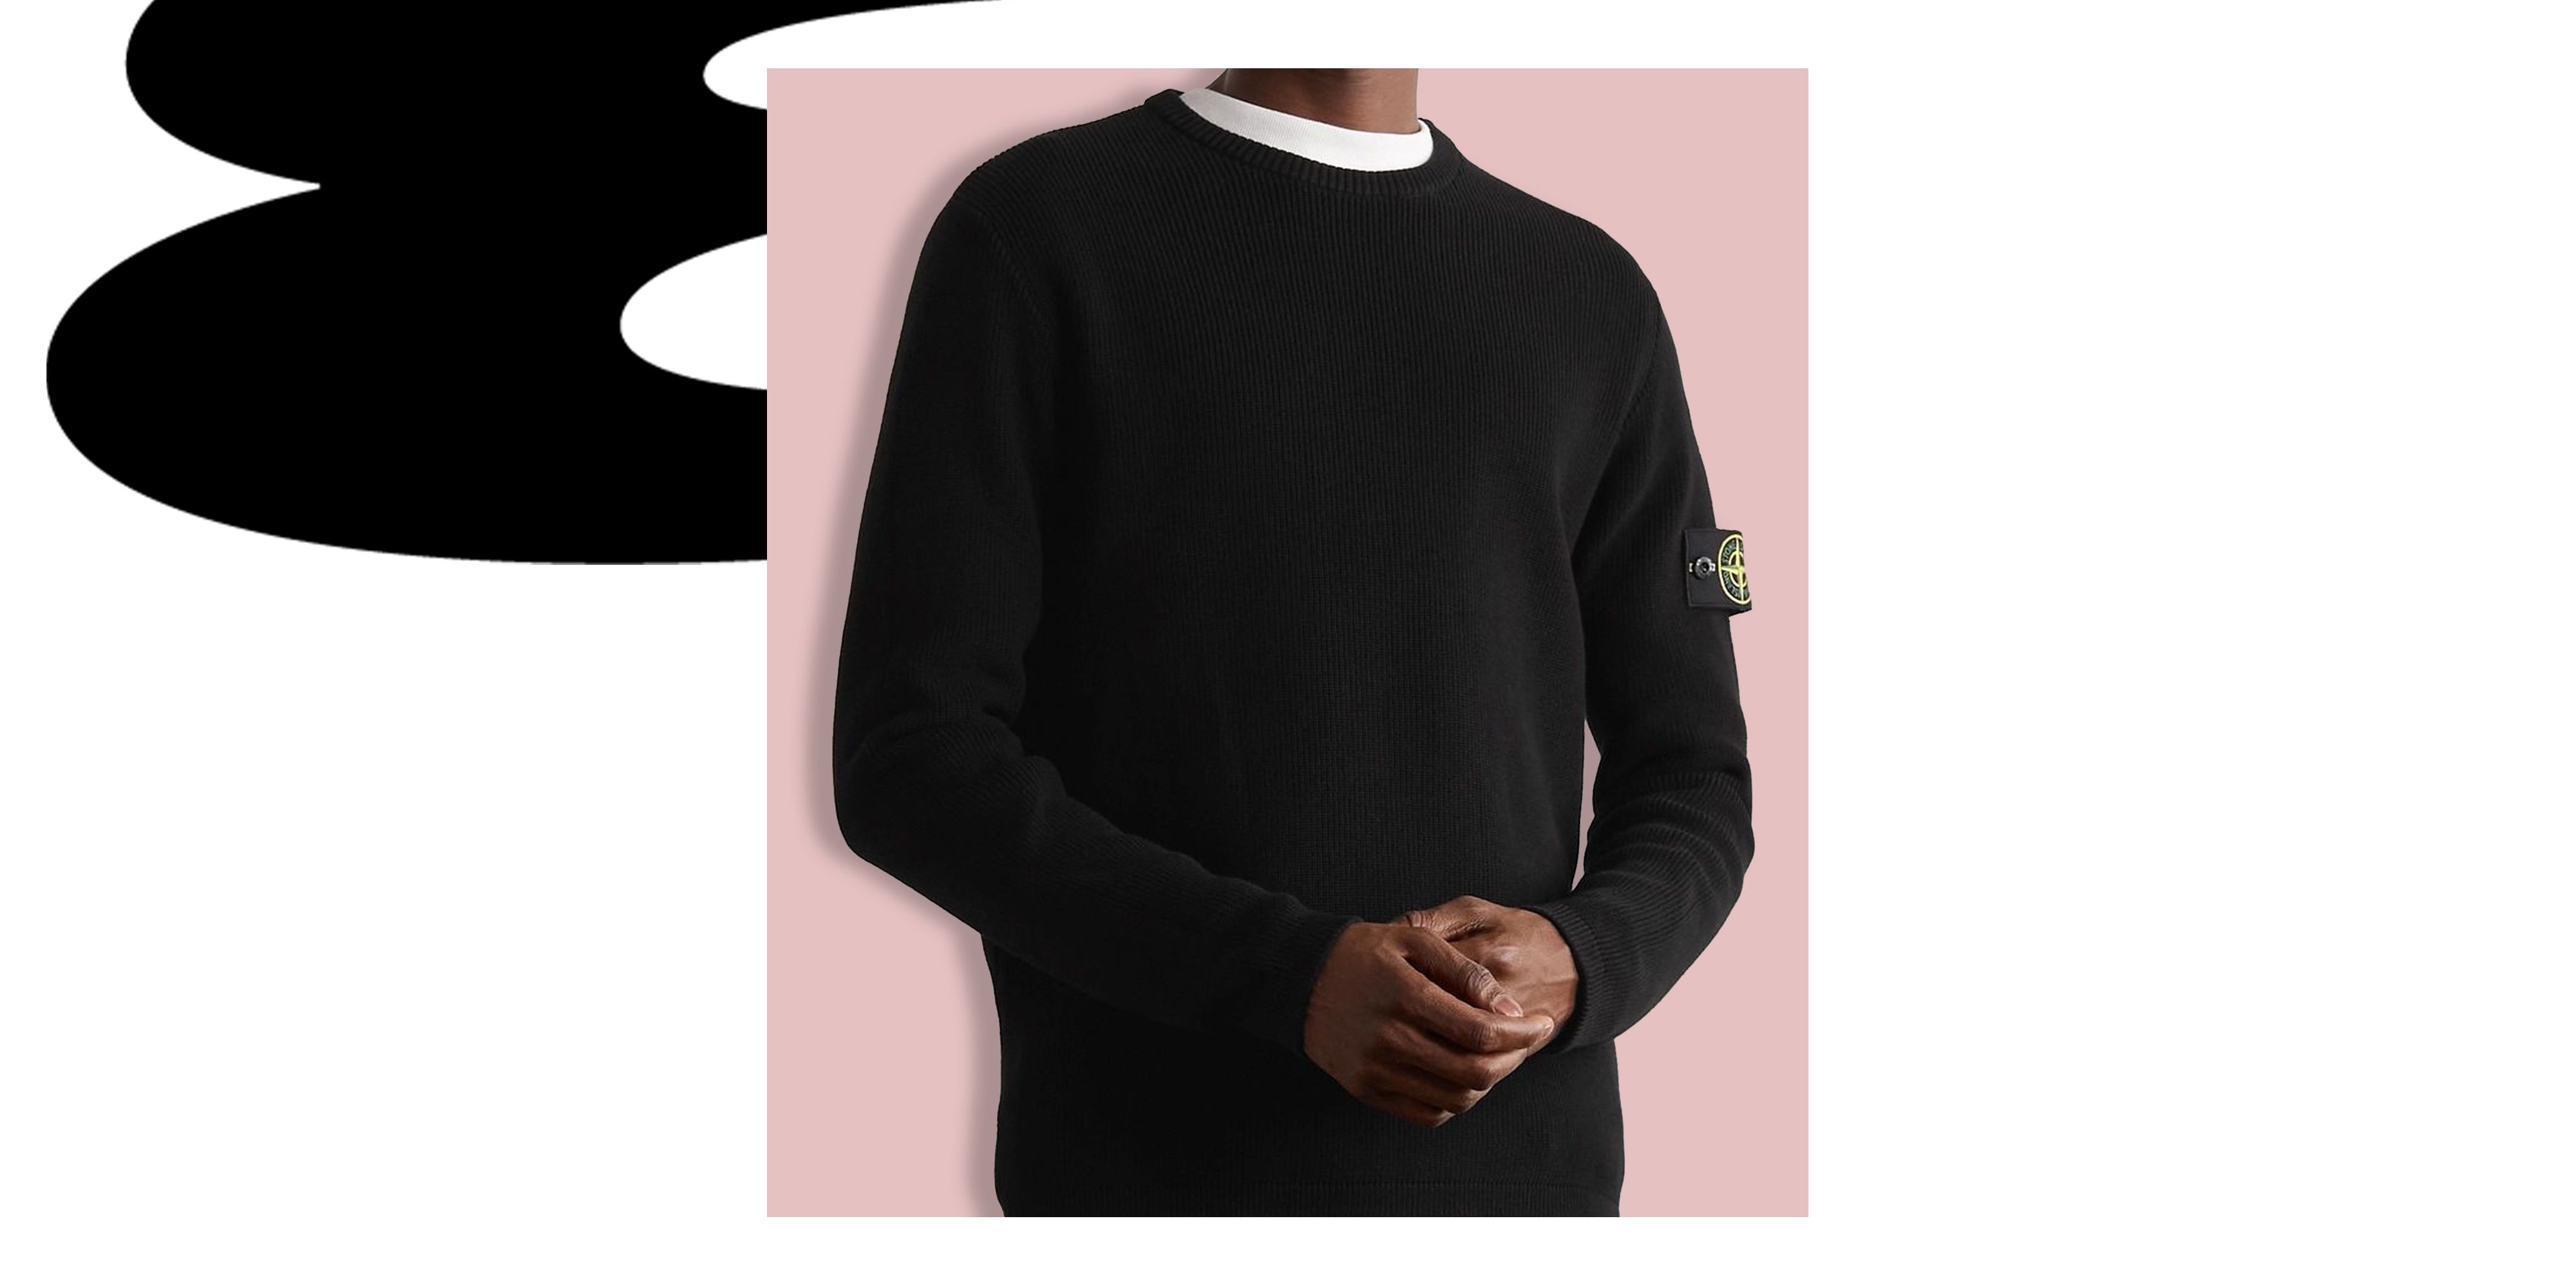 The Classic Comfort: 5 Men's Knit Crew-neck Sweaters for Cozy Winter  Layering 